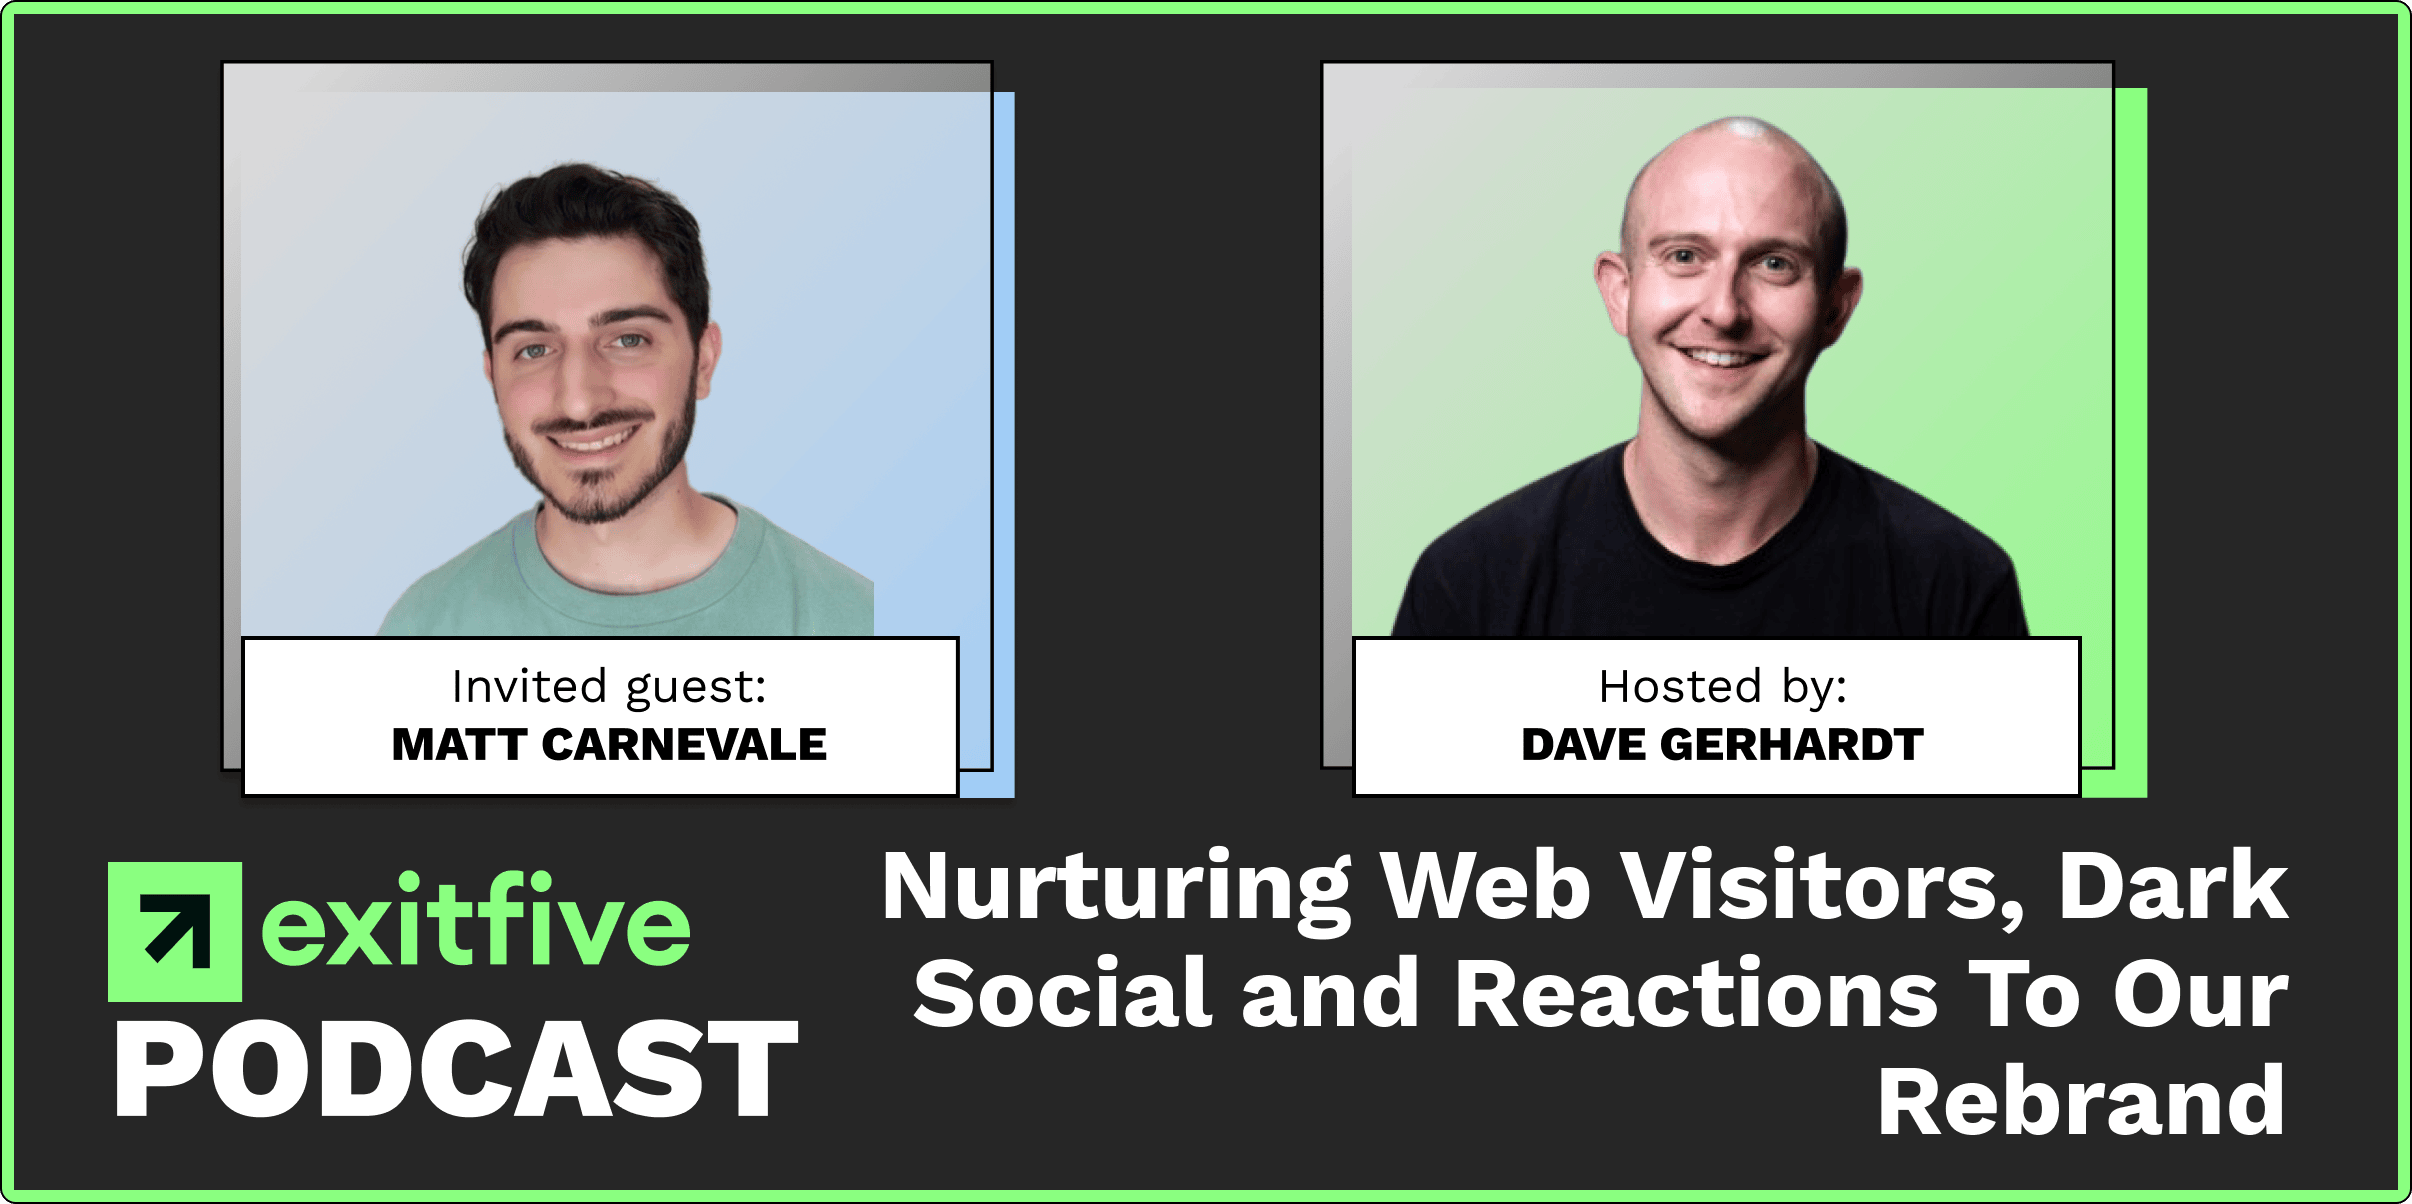 Inside Exit Five | Nurturing Web Visitors, Dark Social and Reactions To Our Rebrand